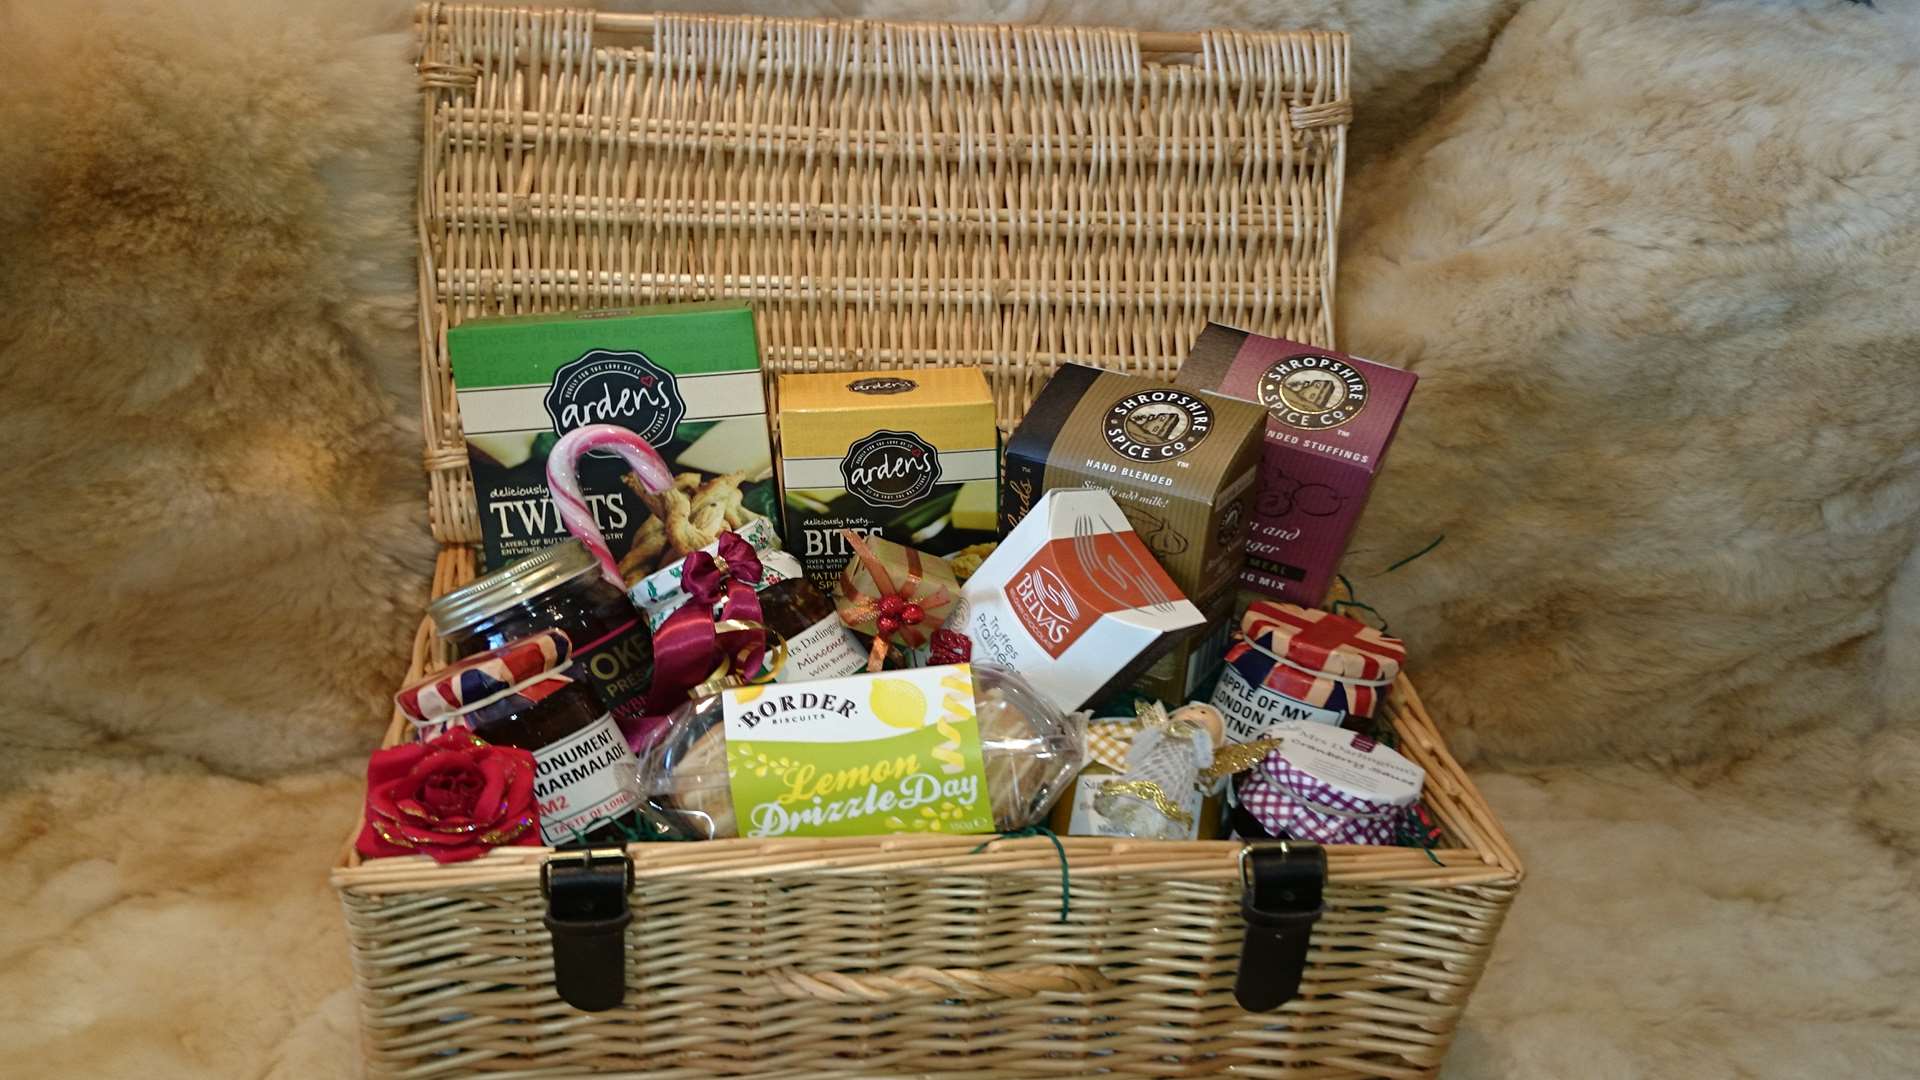 Christmas hampers are on offer at Haguelands